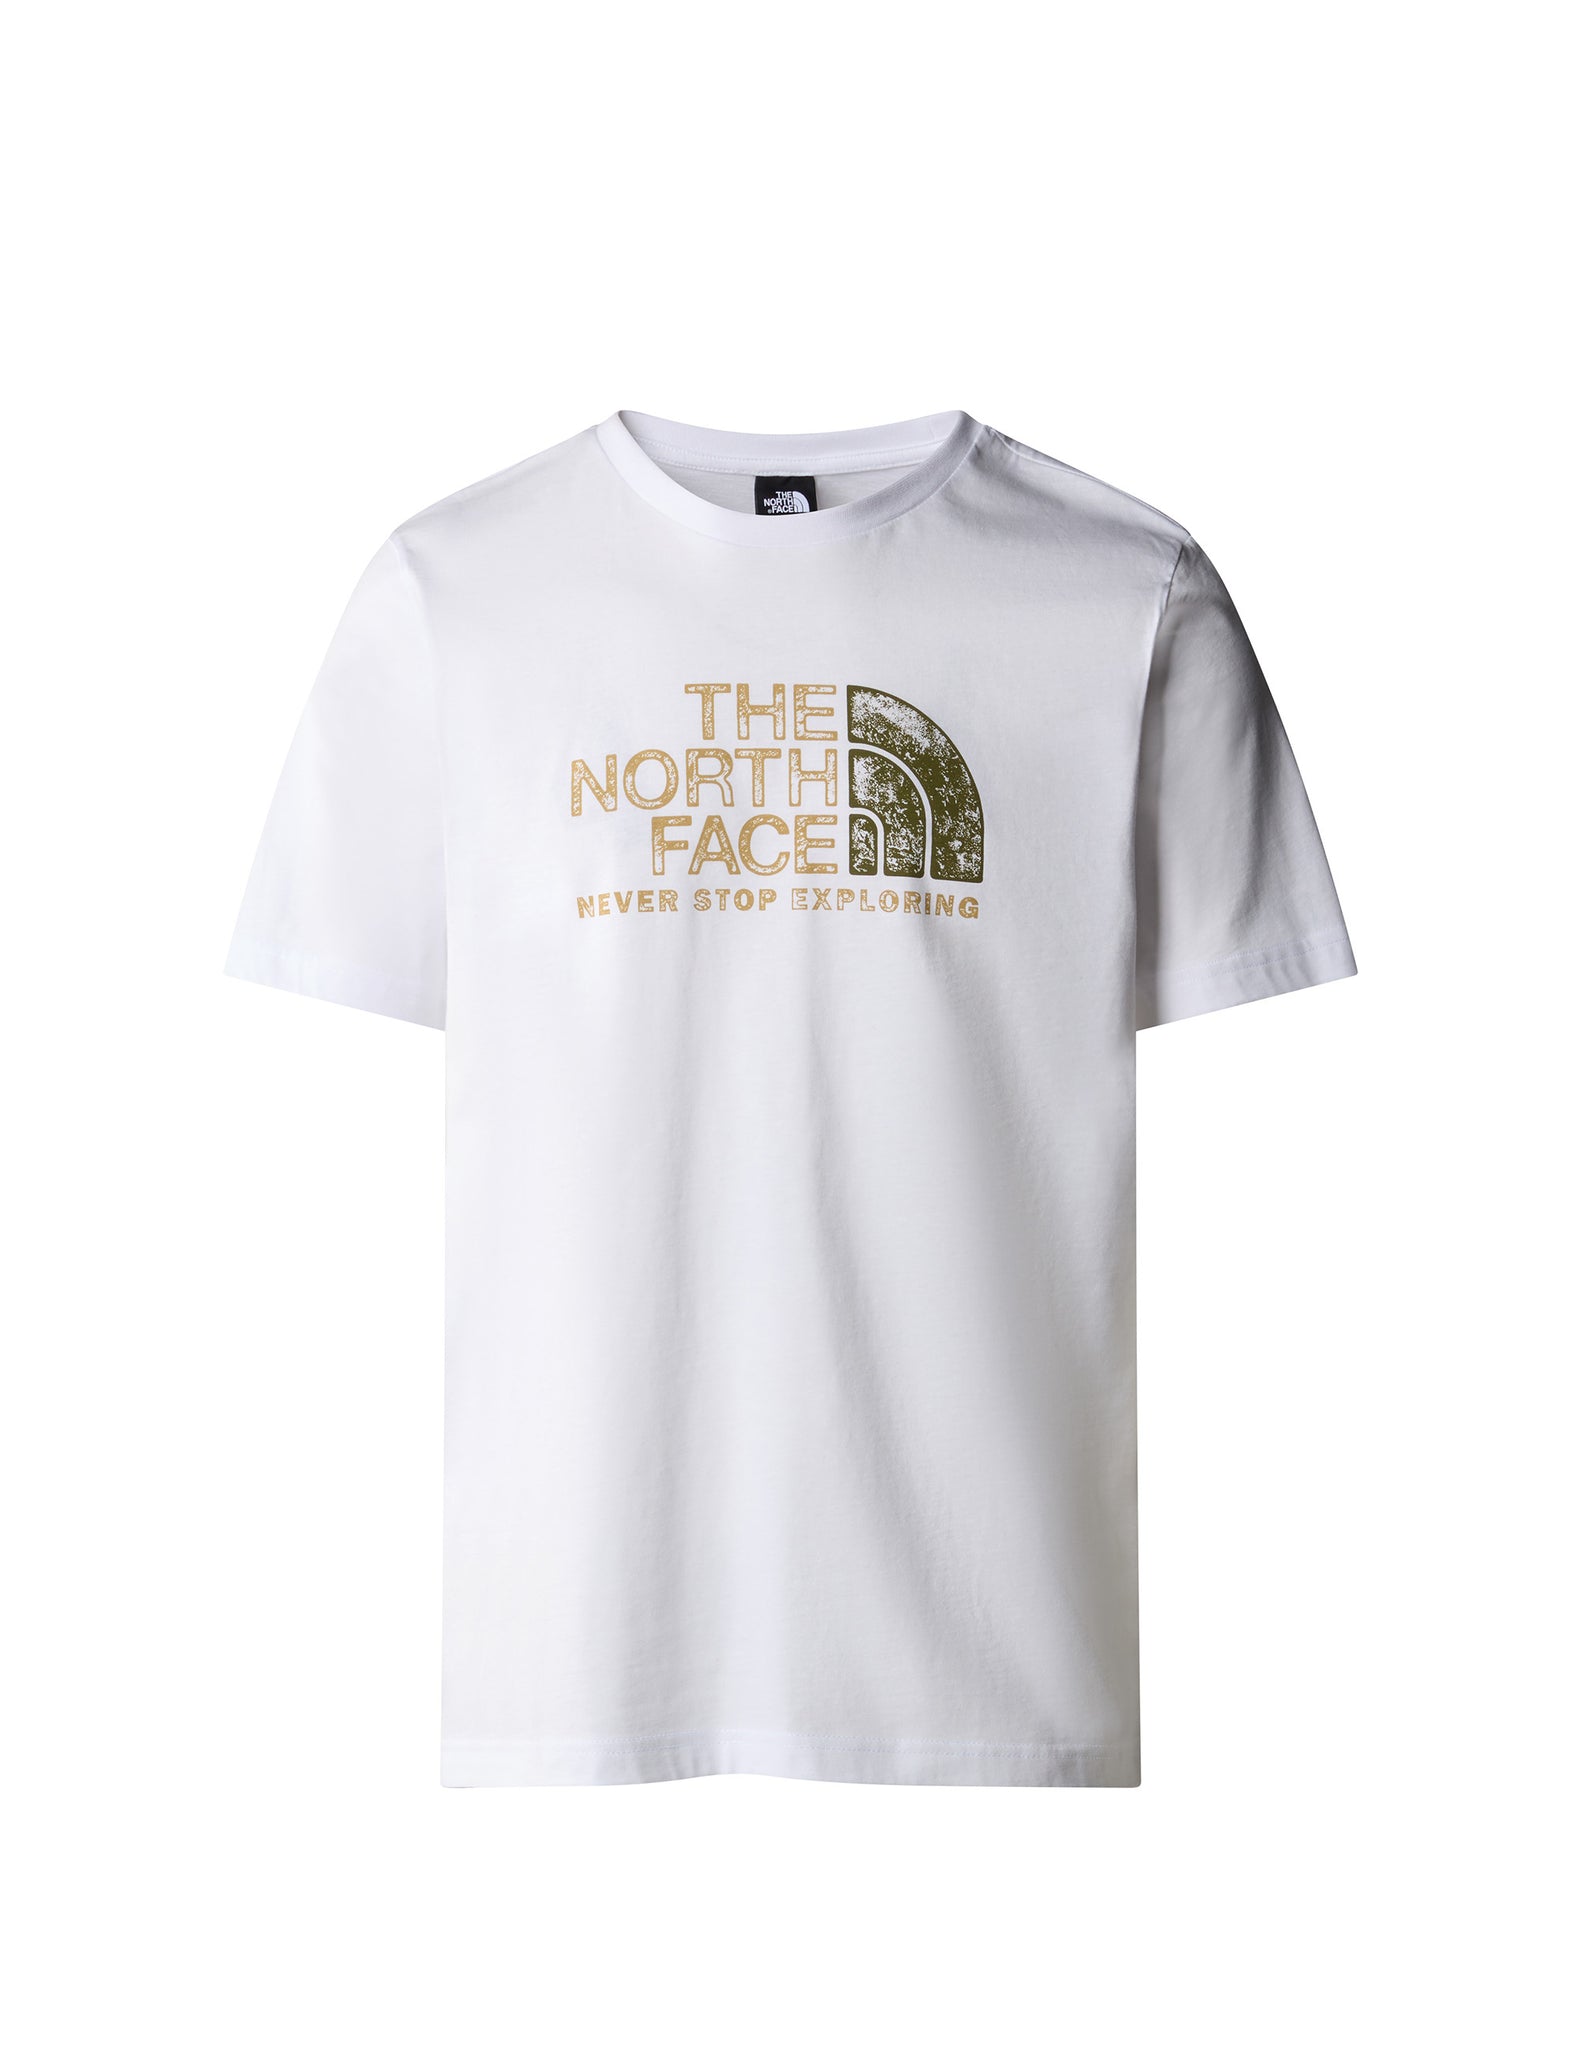 The North Face Men'S S/S Rust 2 Tee White